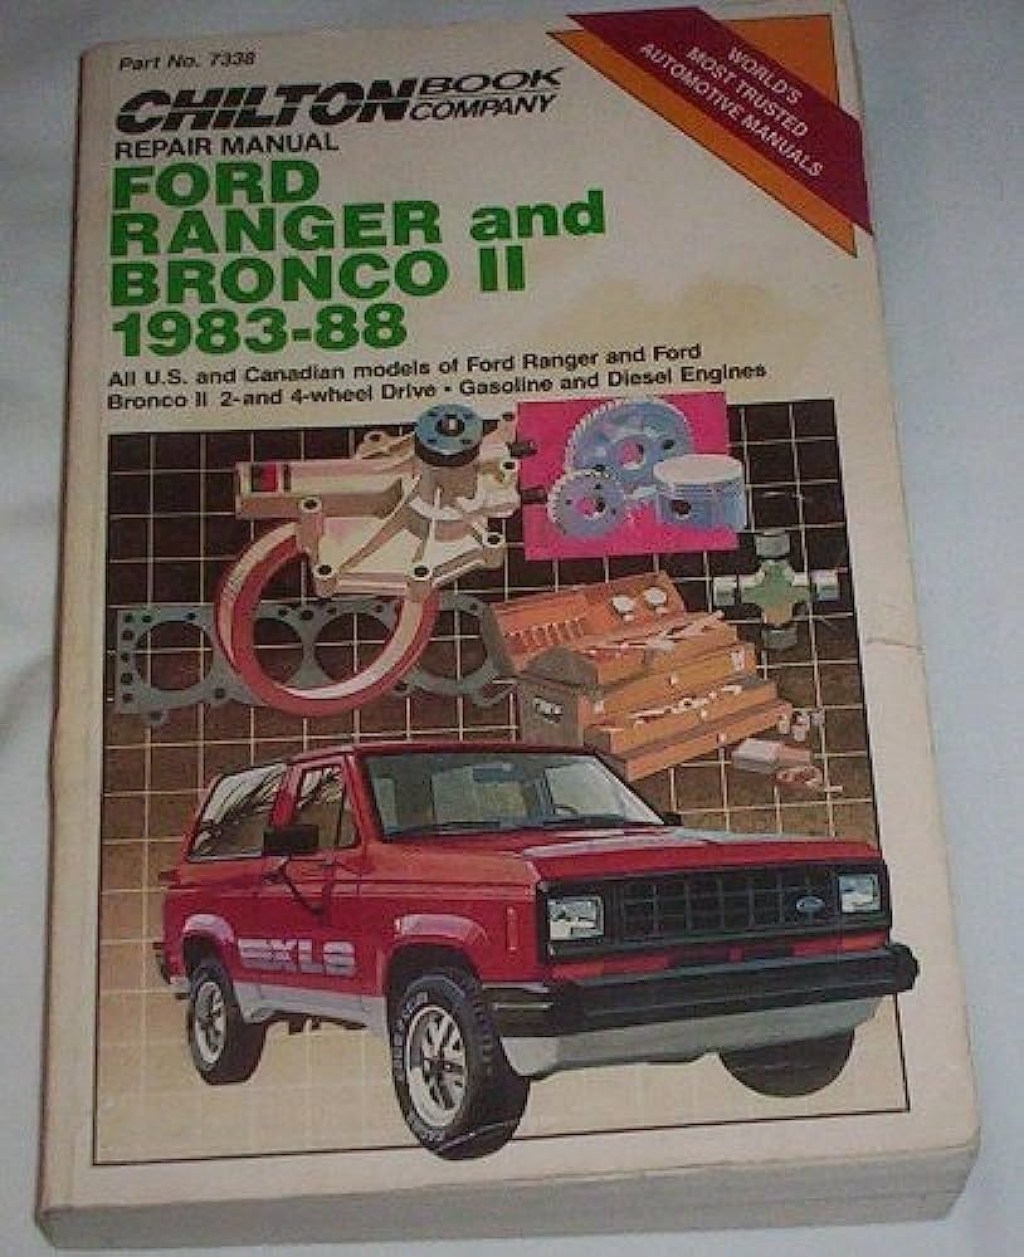 Picture of: Ford Ranger and Bronco II – Repair Manual : Chilton